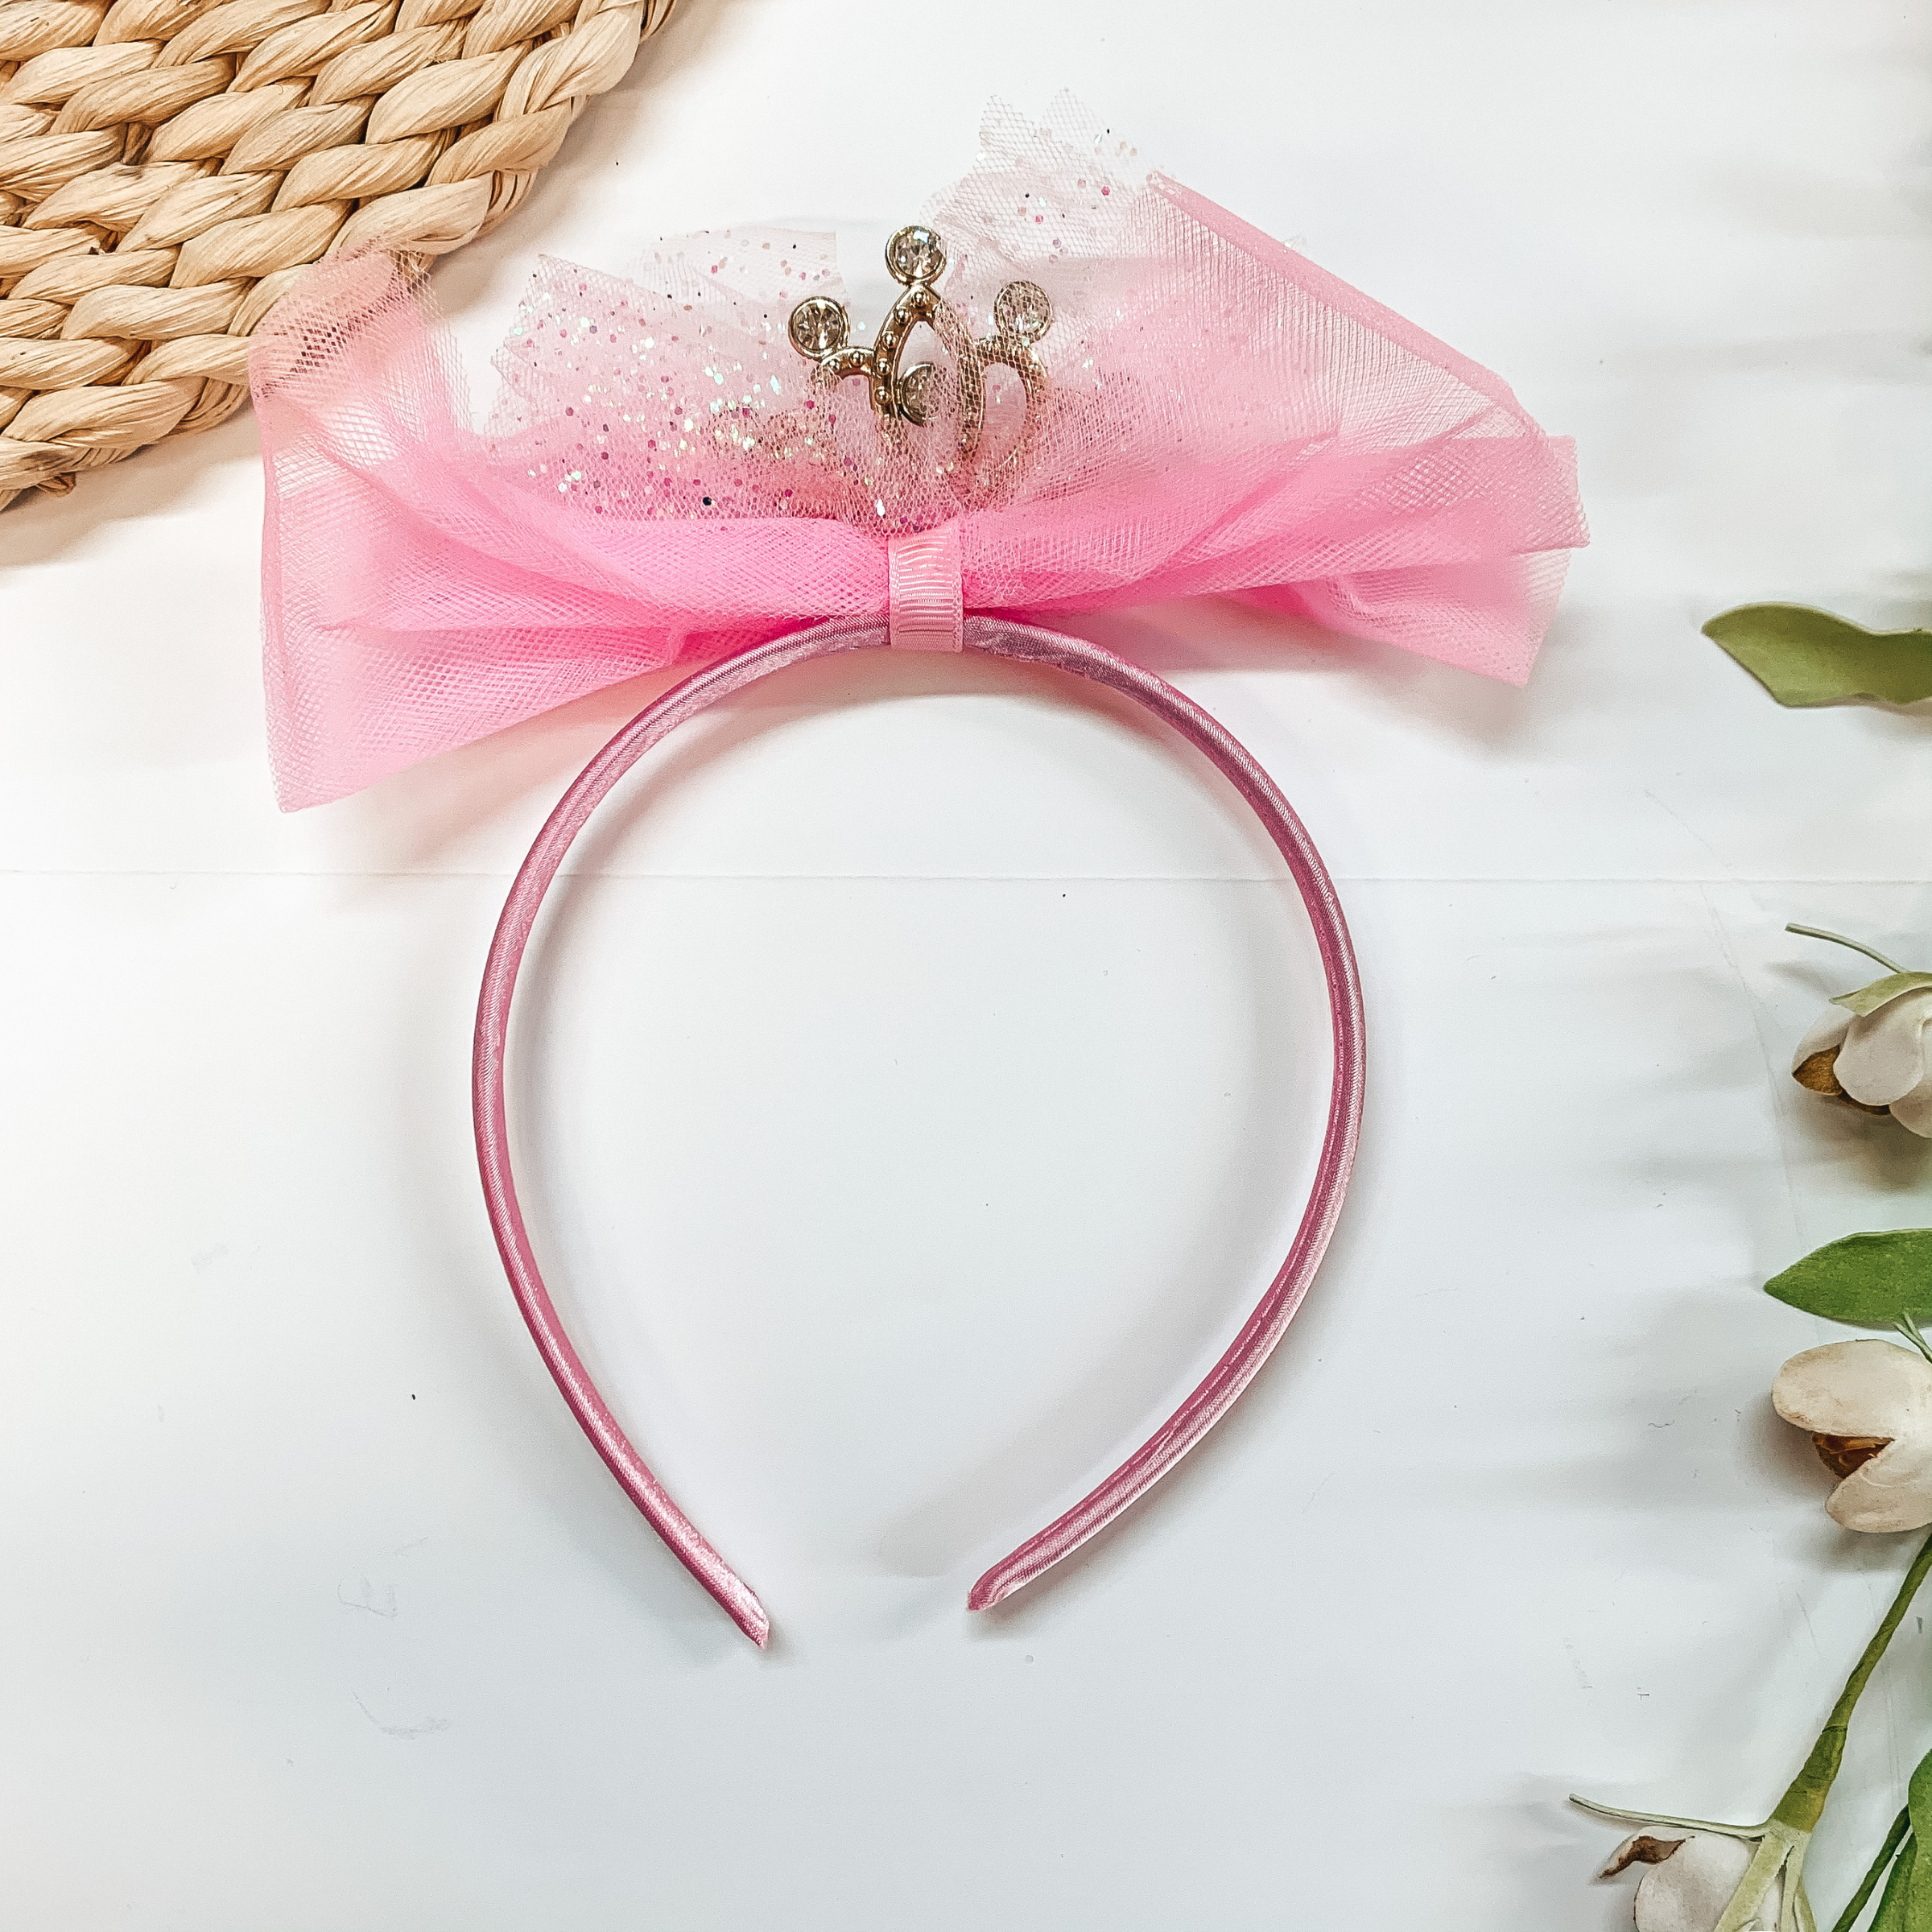 Buy 3 for $10 |  Glitter Headband with Bow and Crown - Giddy Up Glamour Boutique